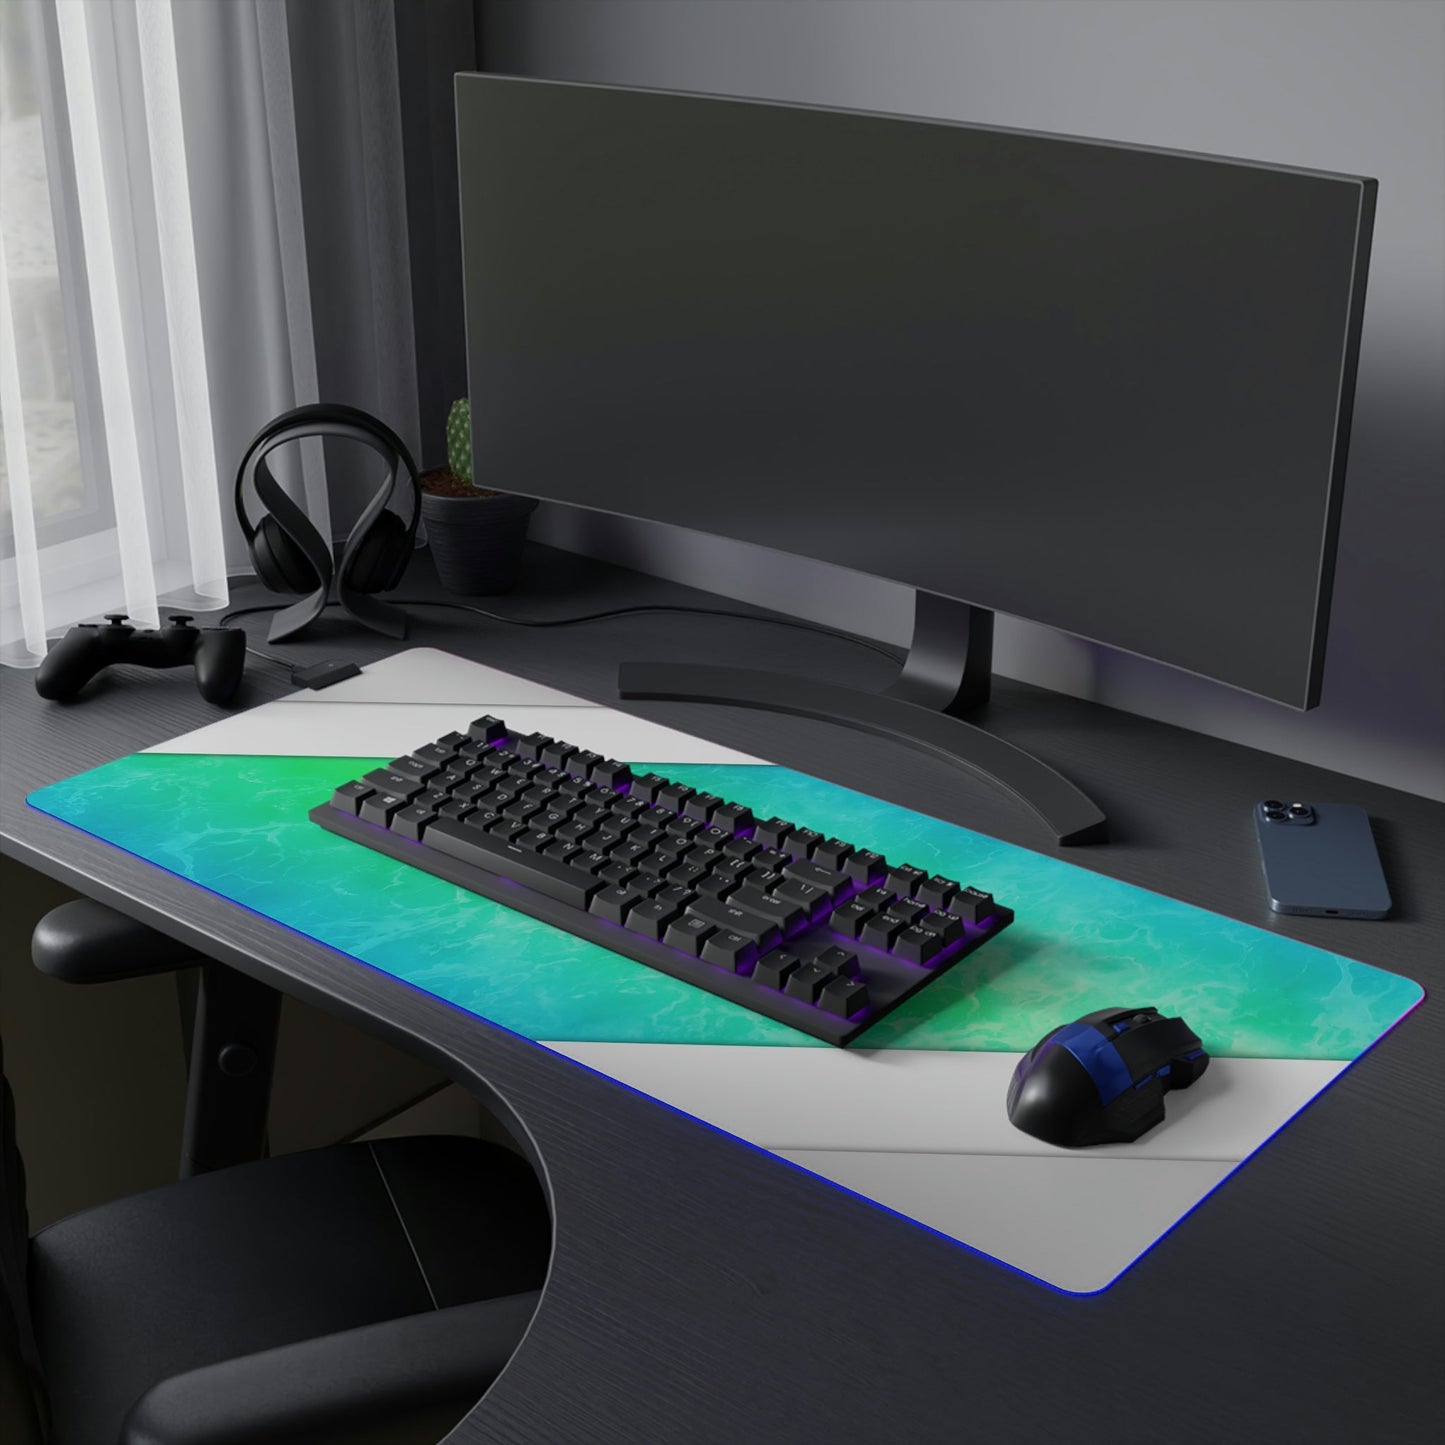 7 Neduz Beach Water LED Gaming Mouse Pad with Clean Steel